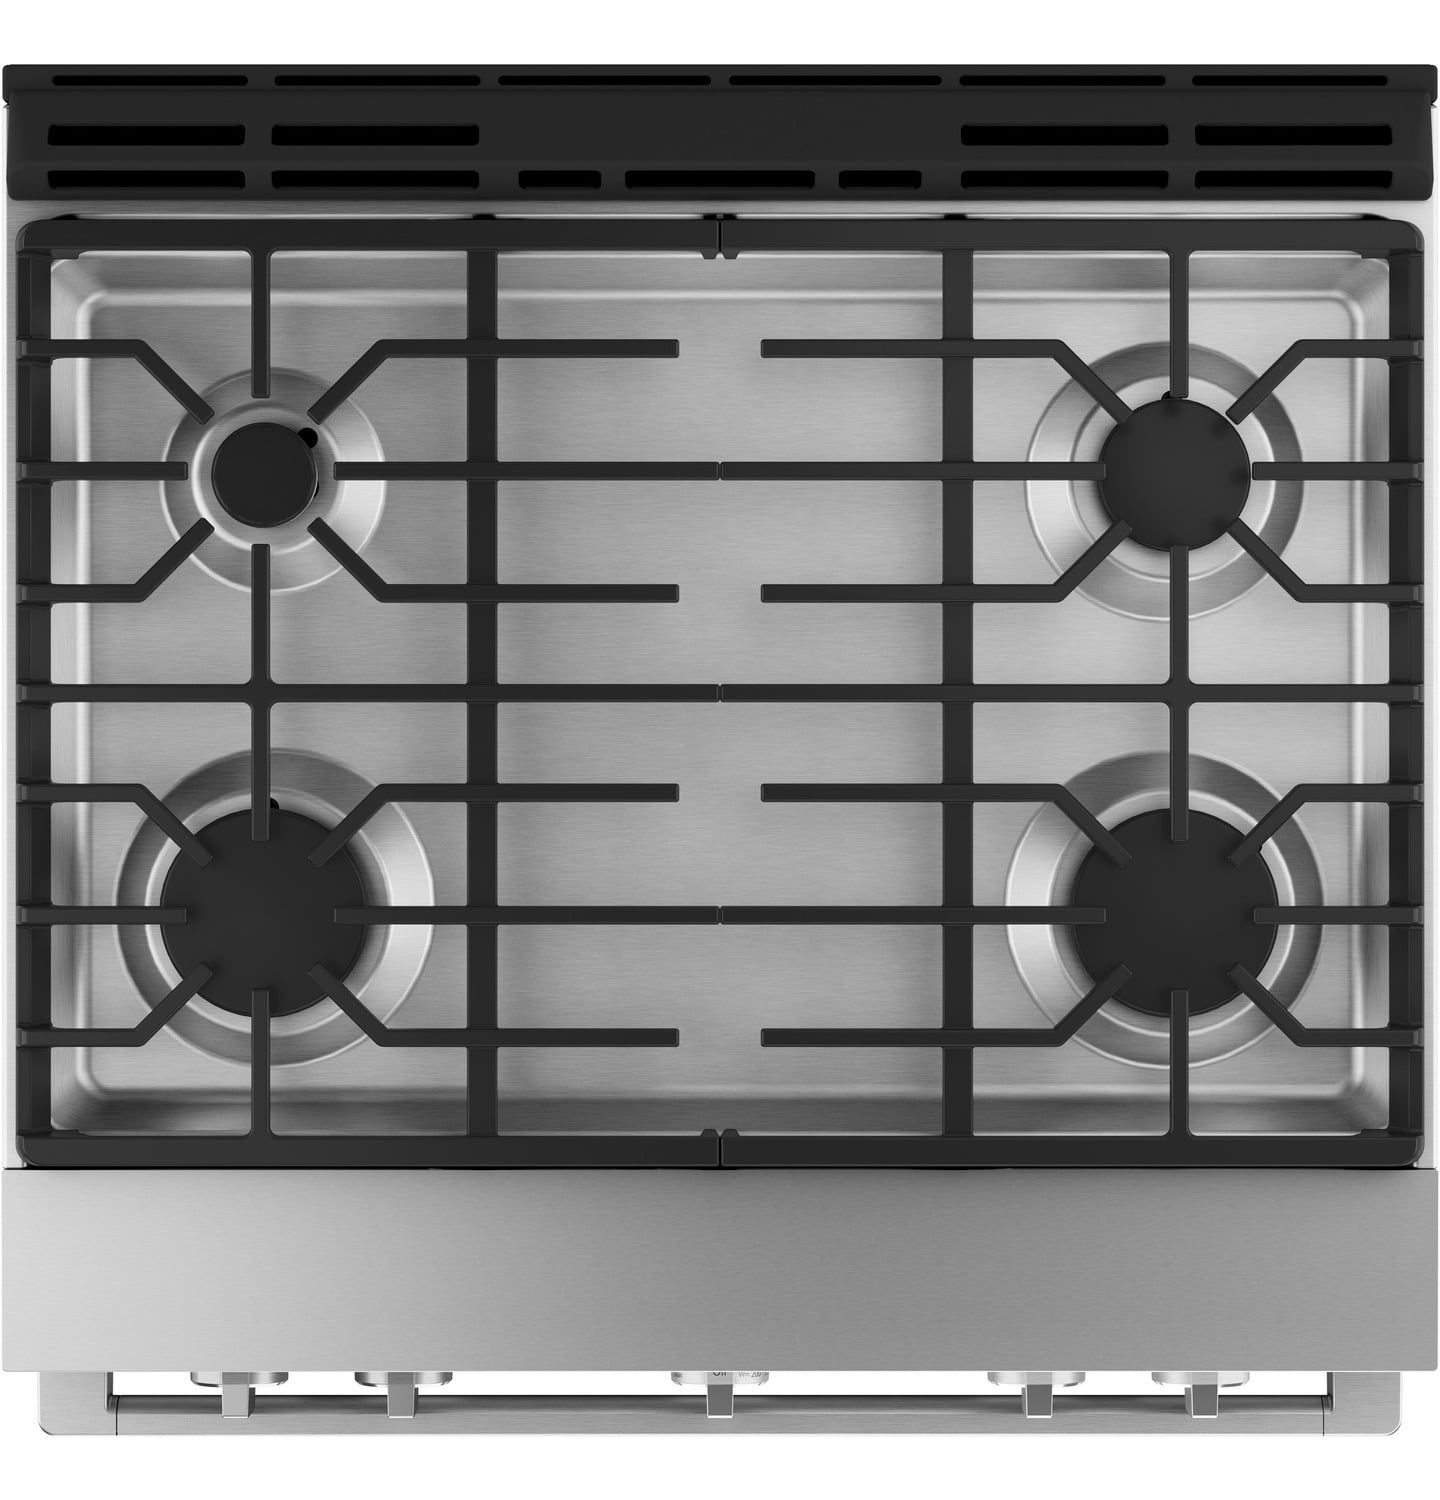 Haier QGSS740RNSS 30" Smart Slide-In Gas Range With Convection